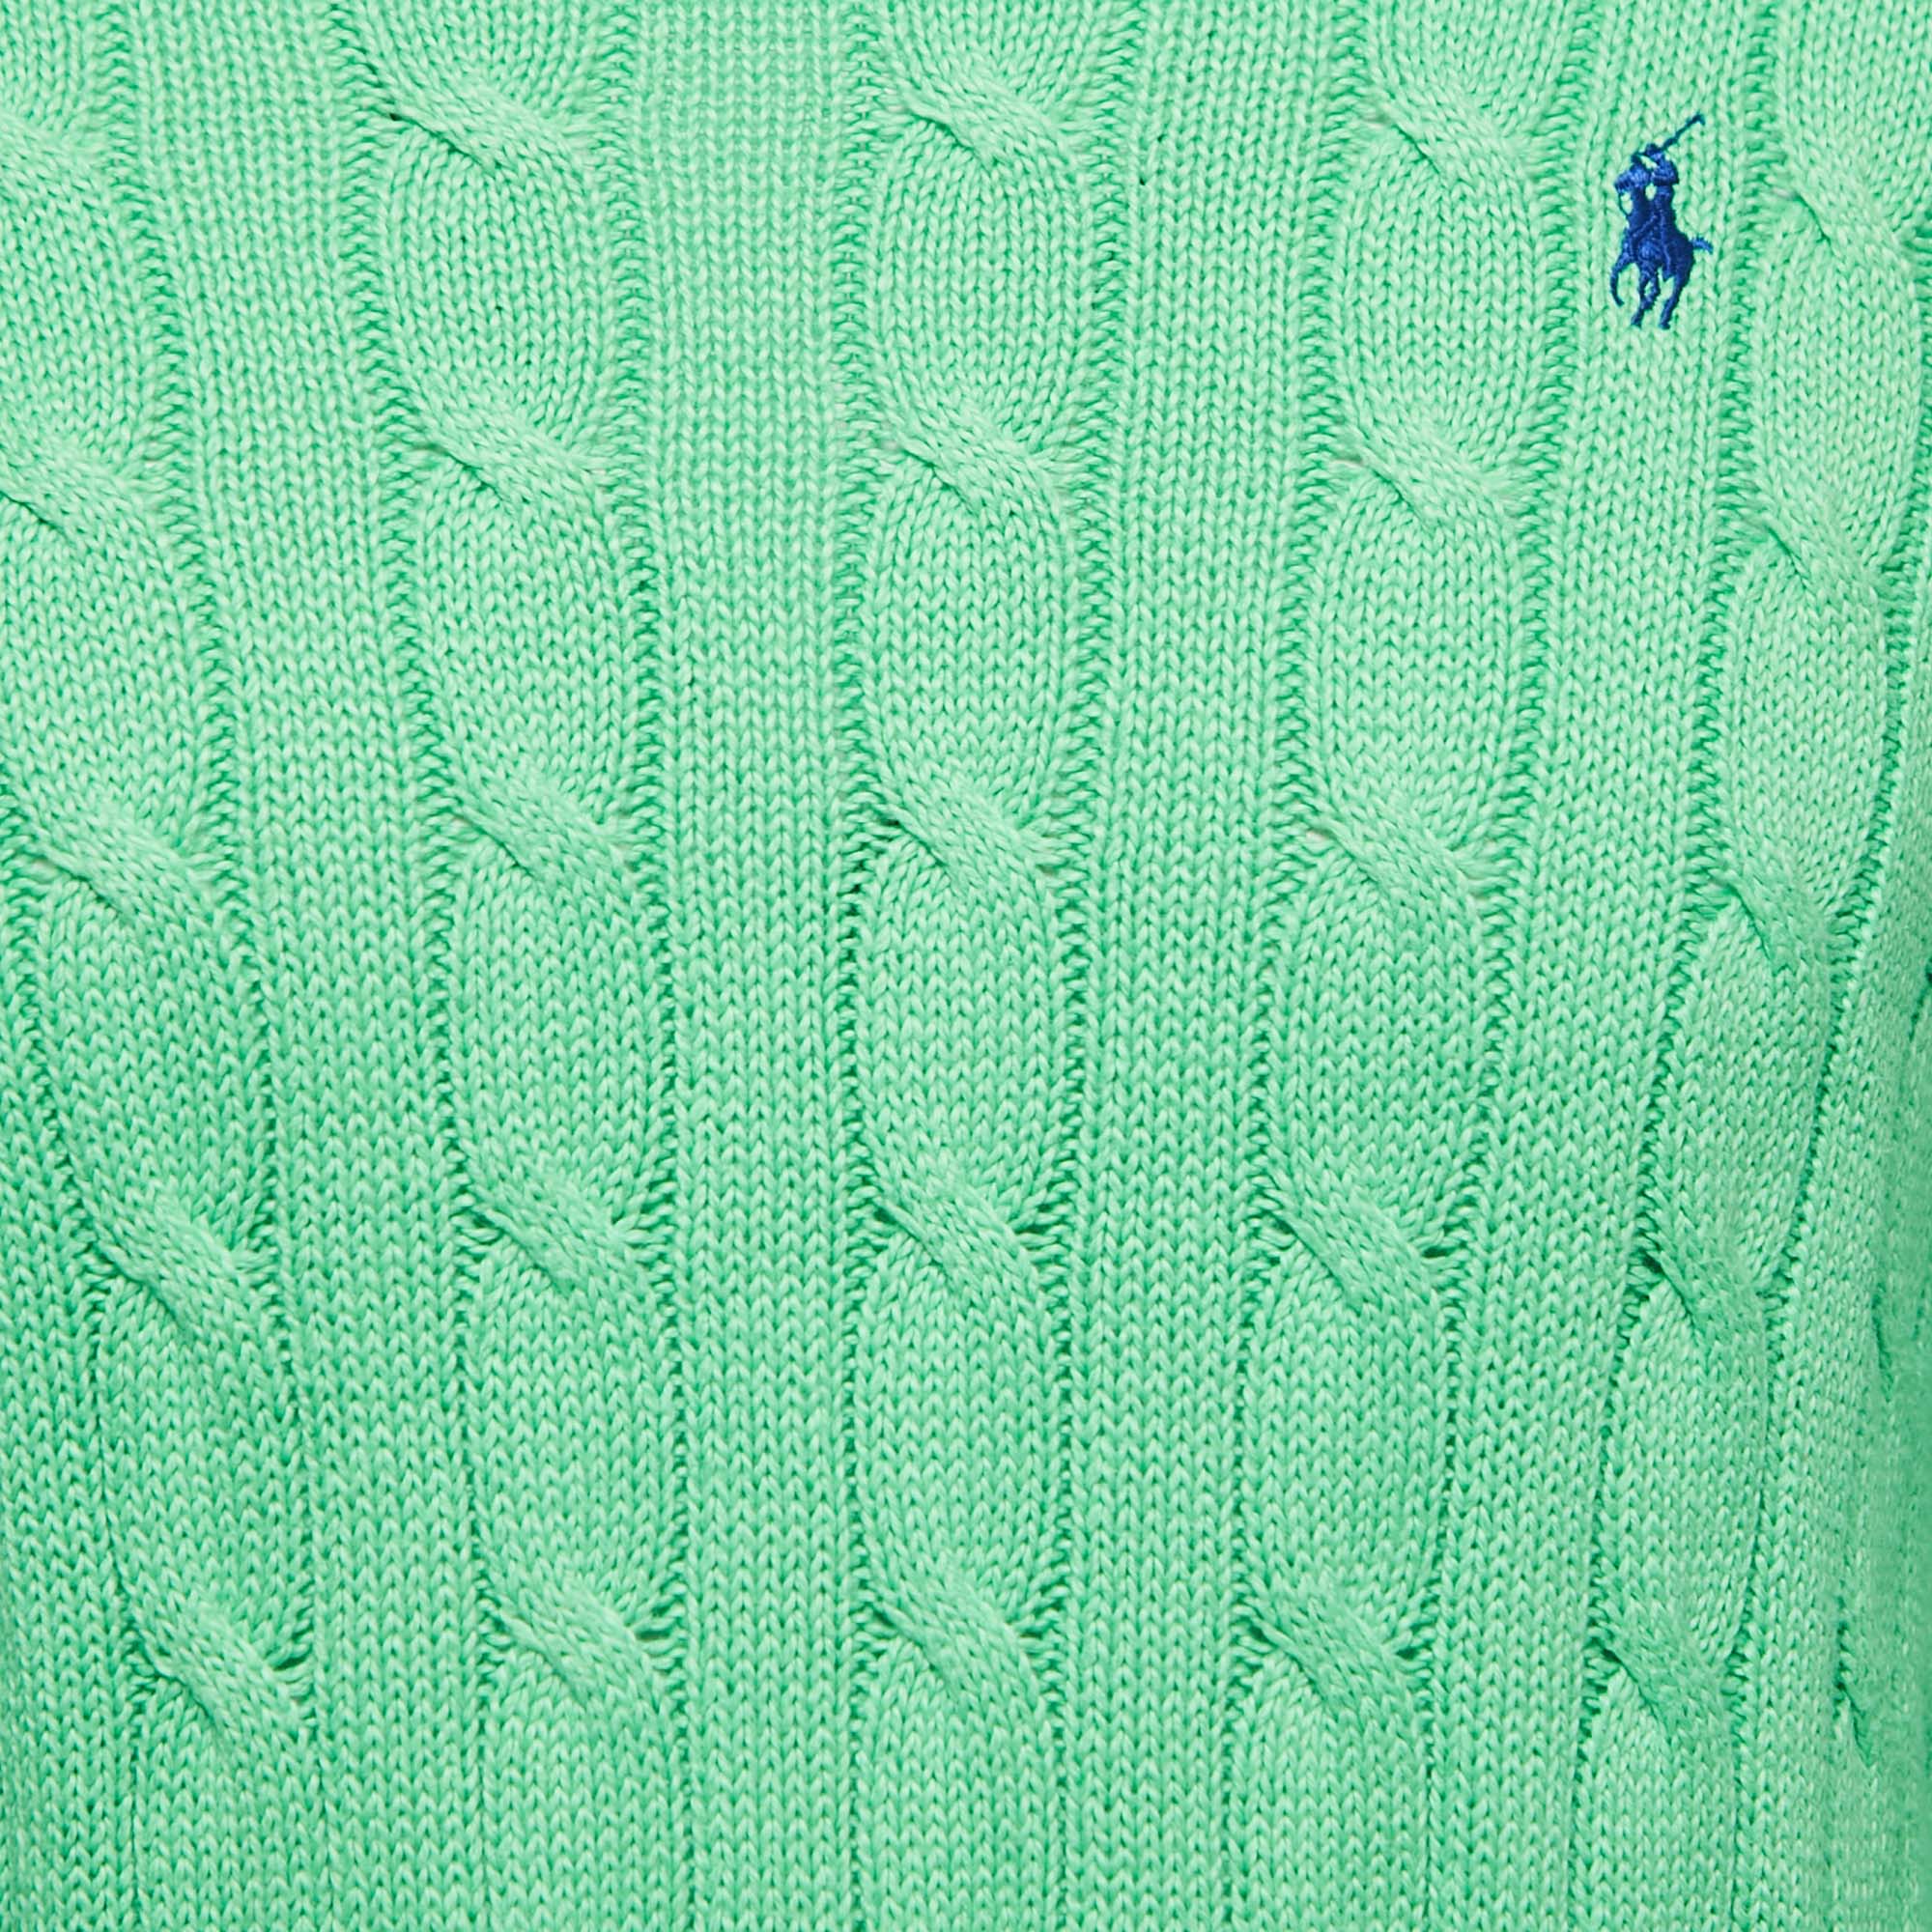 Polo Ralph Lauren Green Cable Knit Crew Neck Sweater S